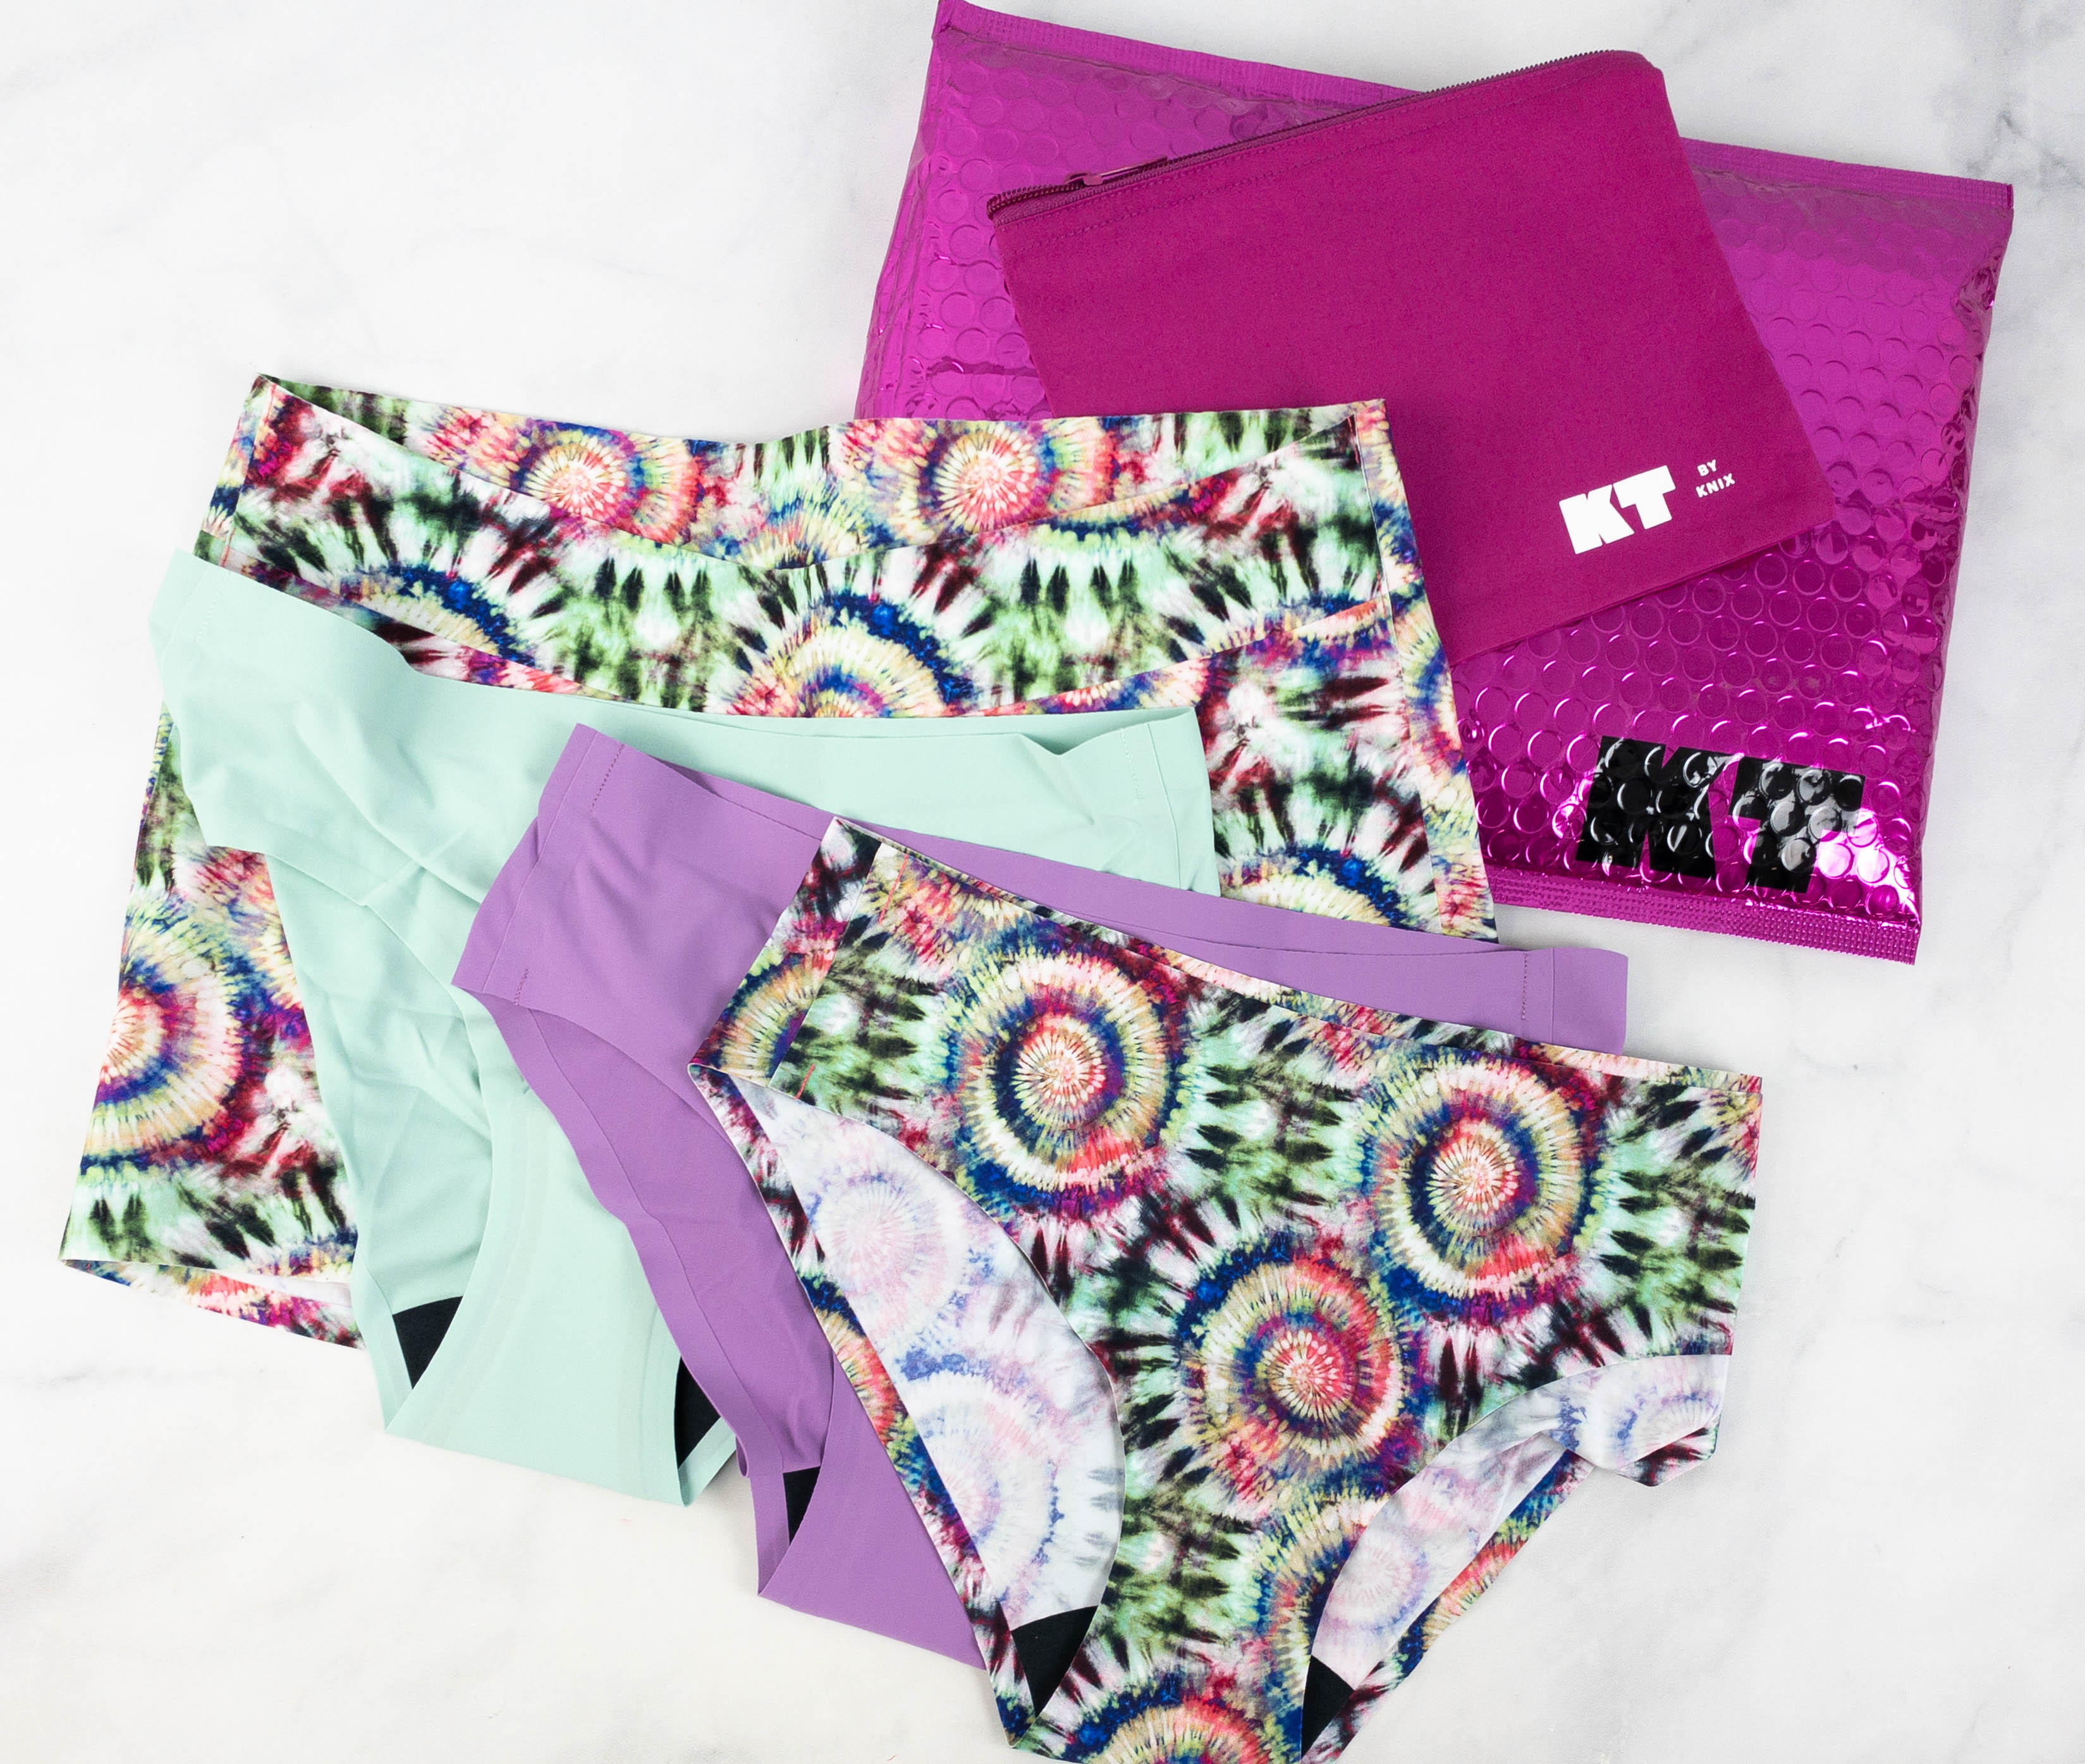 KT by Knix Reviews: Get All The Details At Hello Subscription!